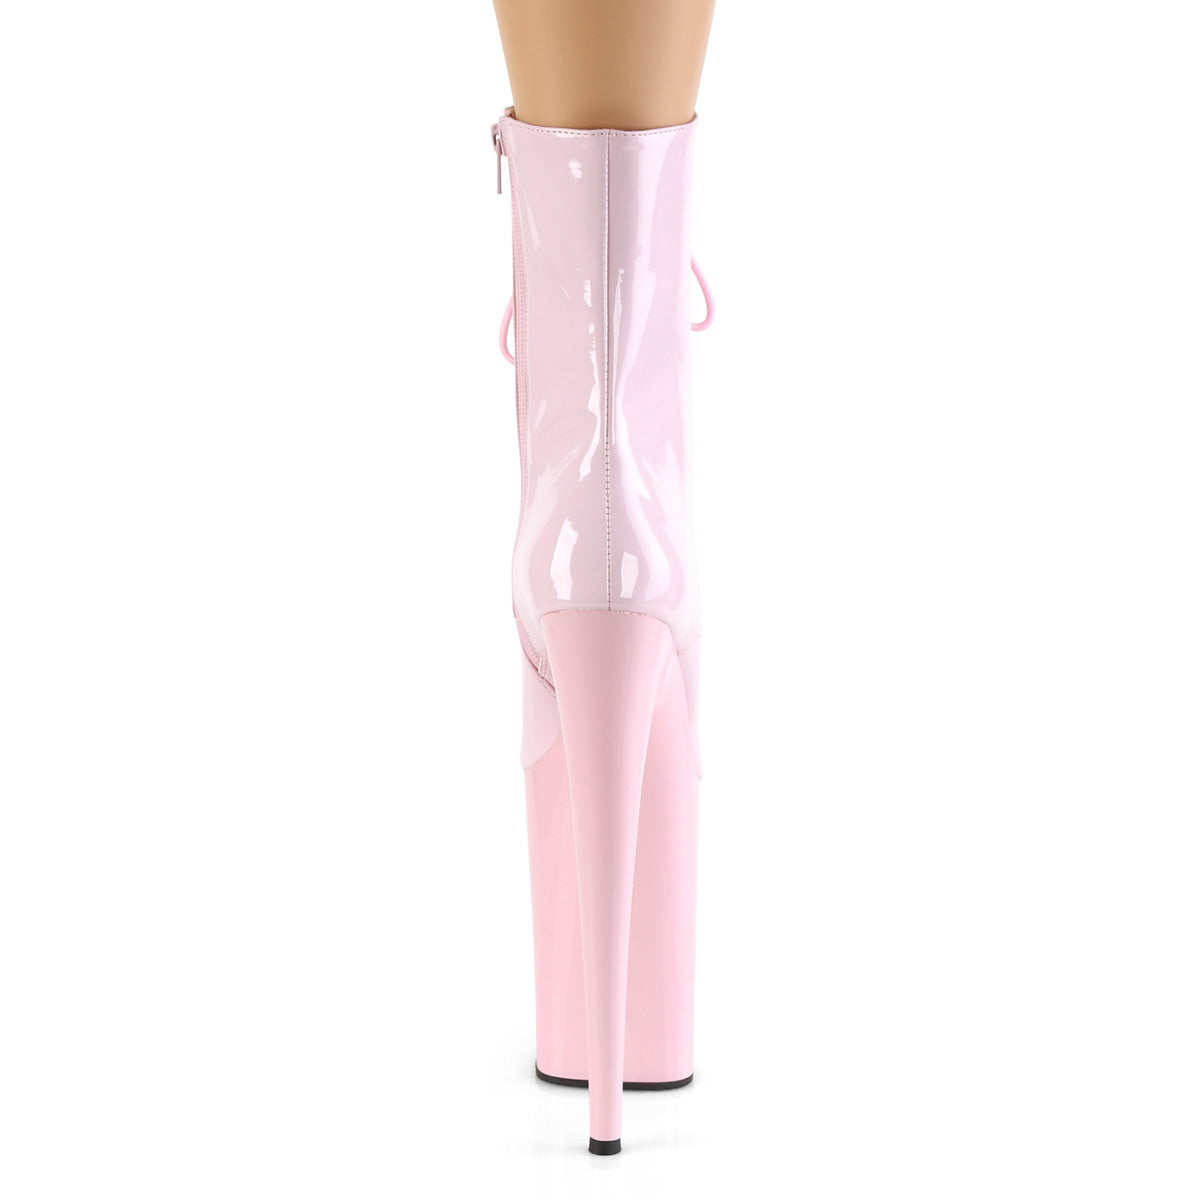 INFINITY-1020 Calf High Boots Pink Multi view 3